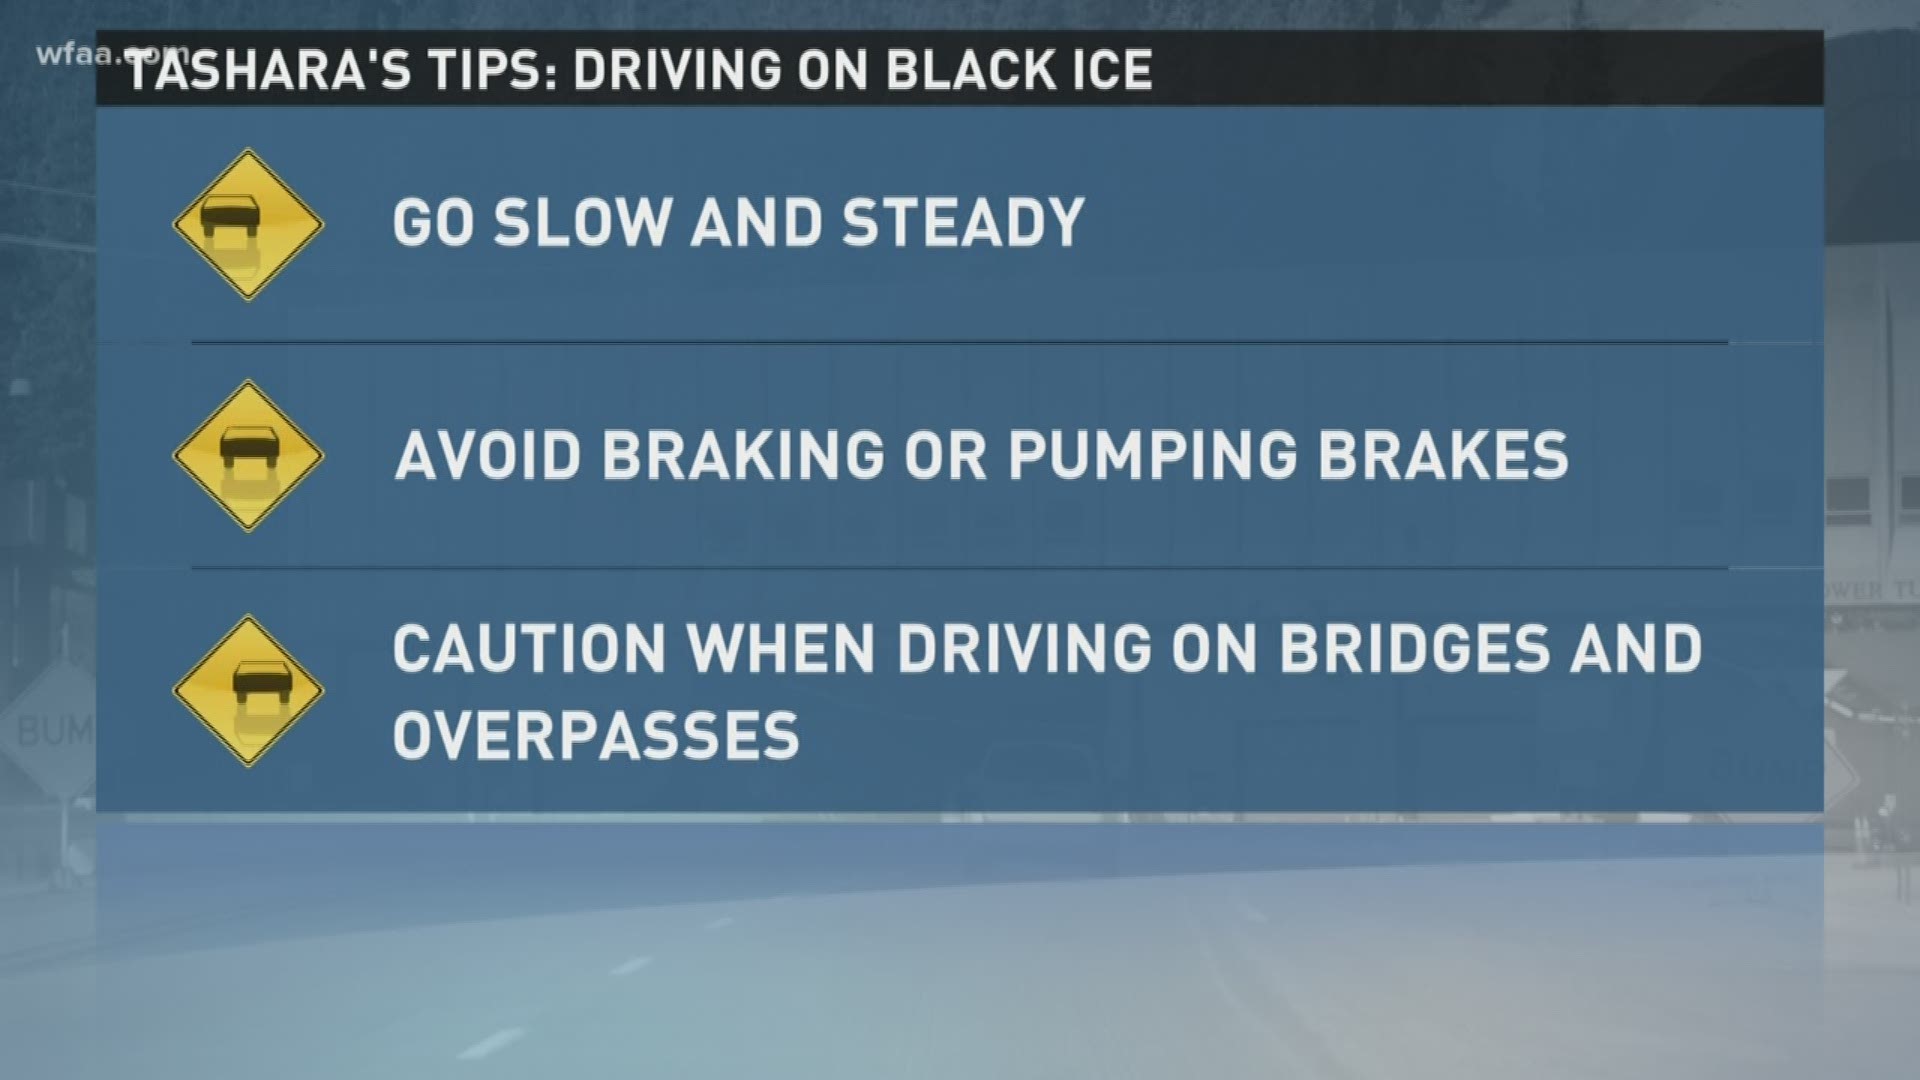 Slick roads made for a messy commute Friday morning around Dallas Fort-Worth. Here are tips to follow if you encounter black ice while driving.